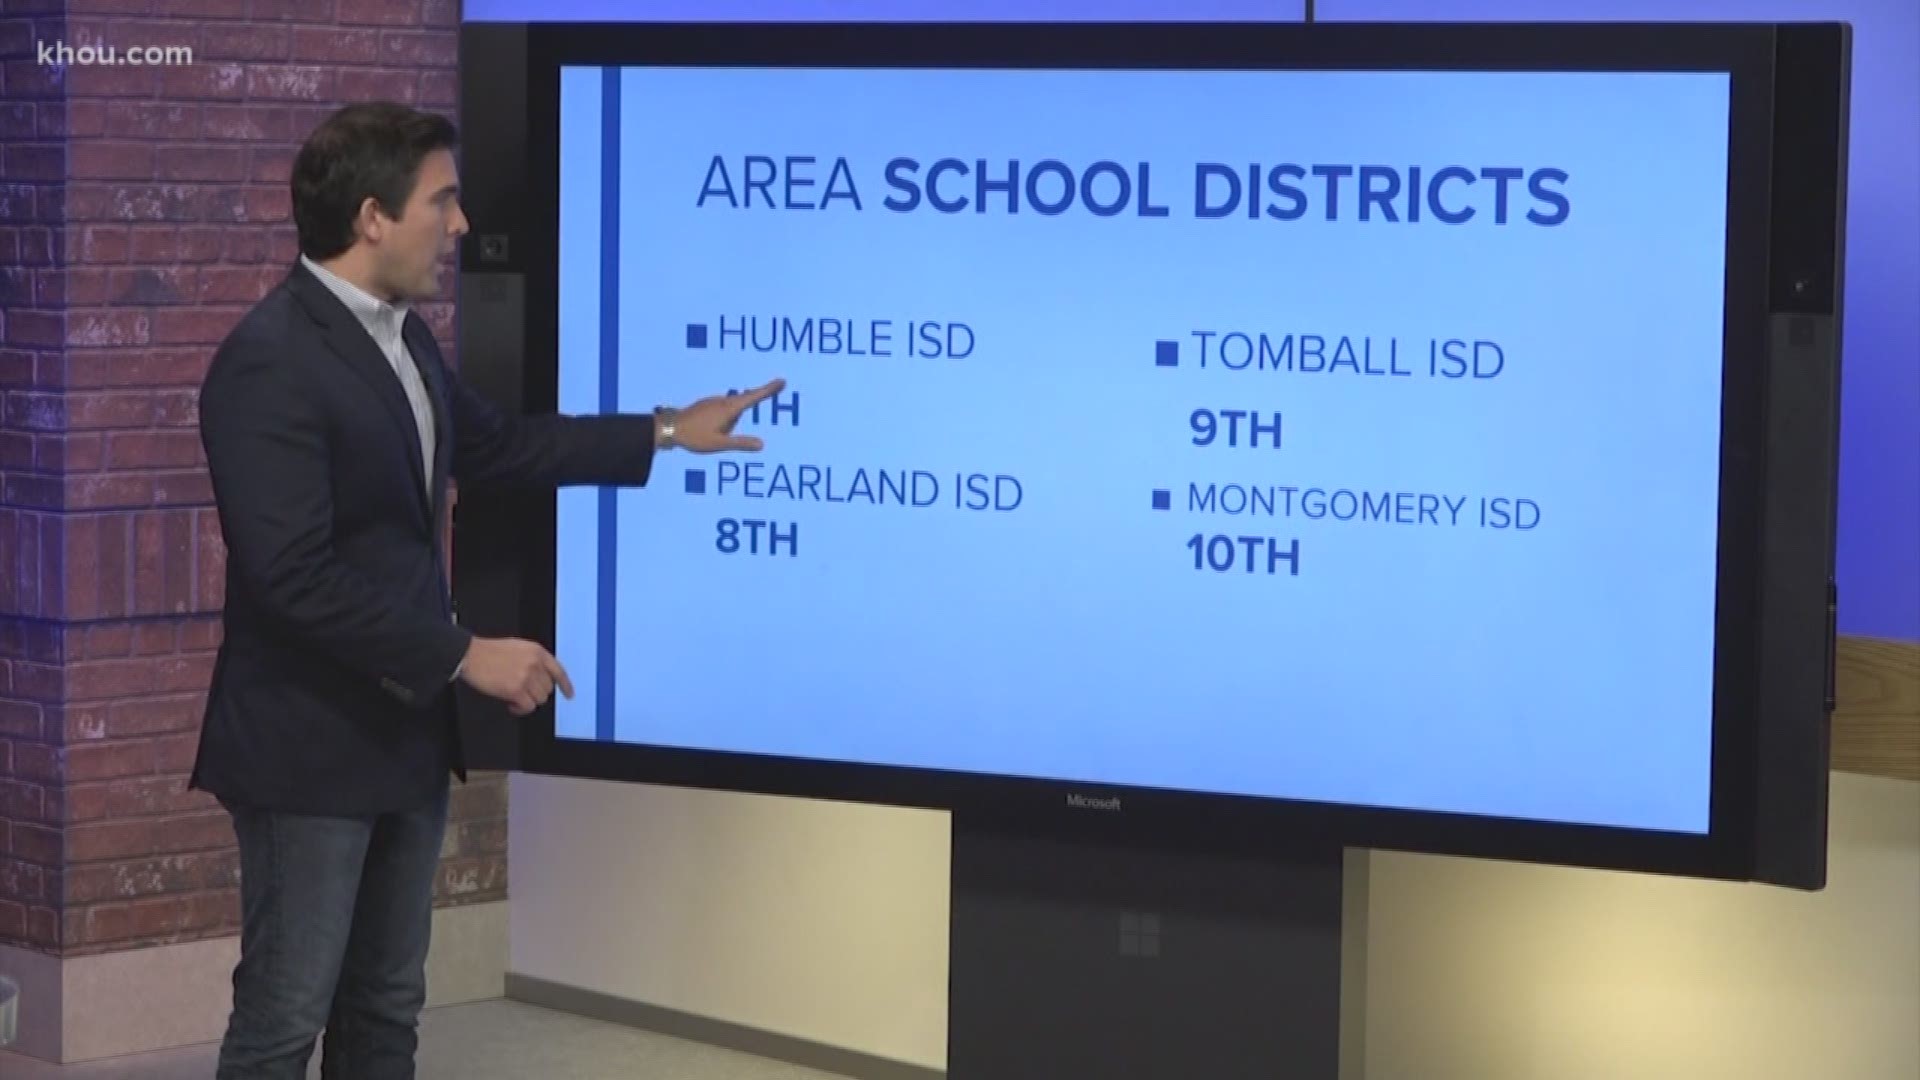 According to Niche.com, a public data analysis site, the safest school district in the greater Houston area is Friendswood ISD.